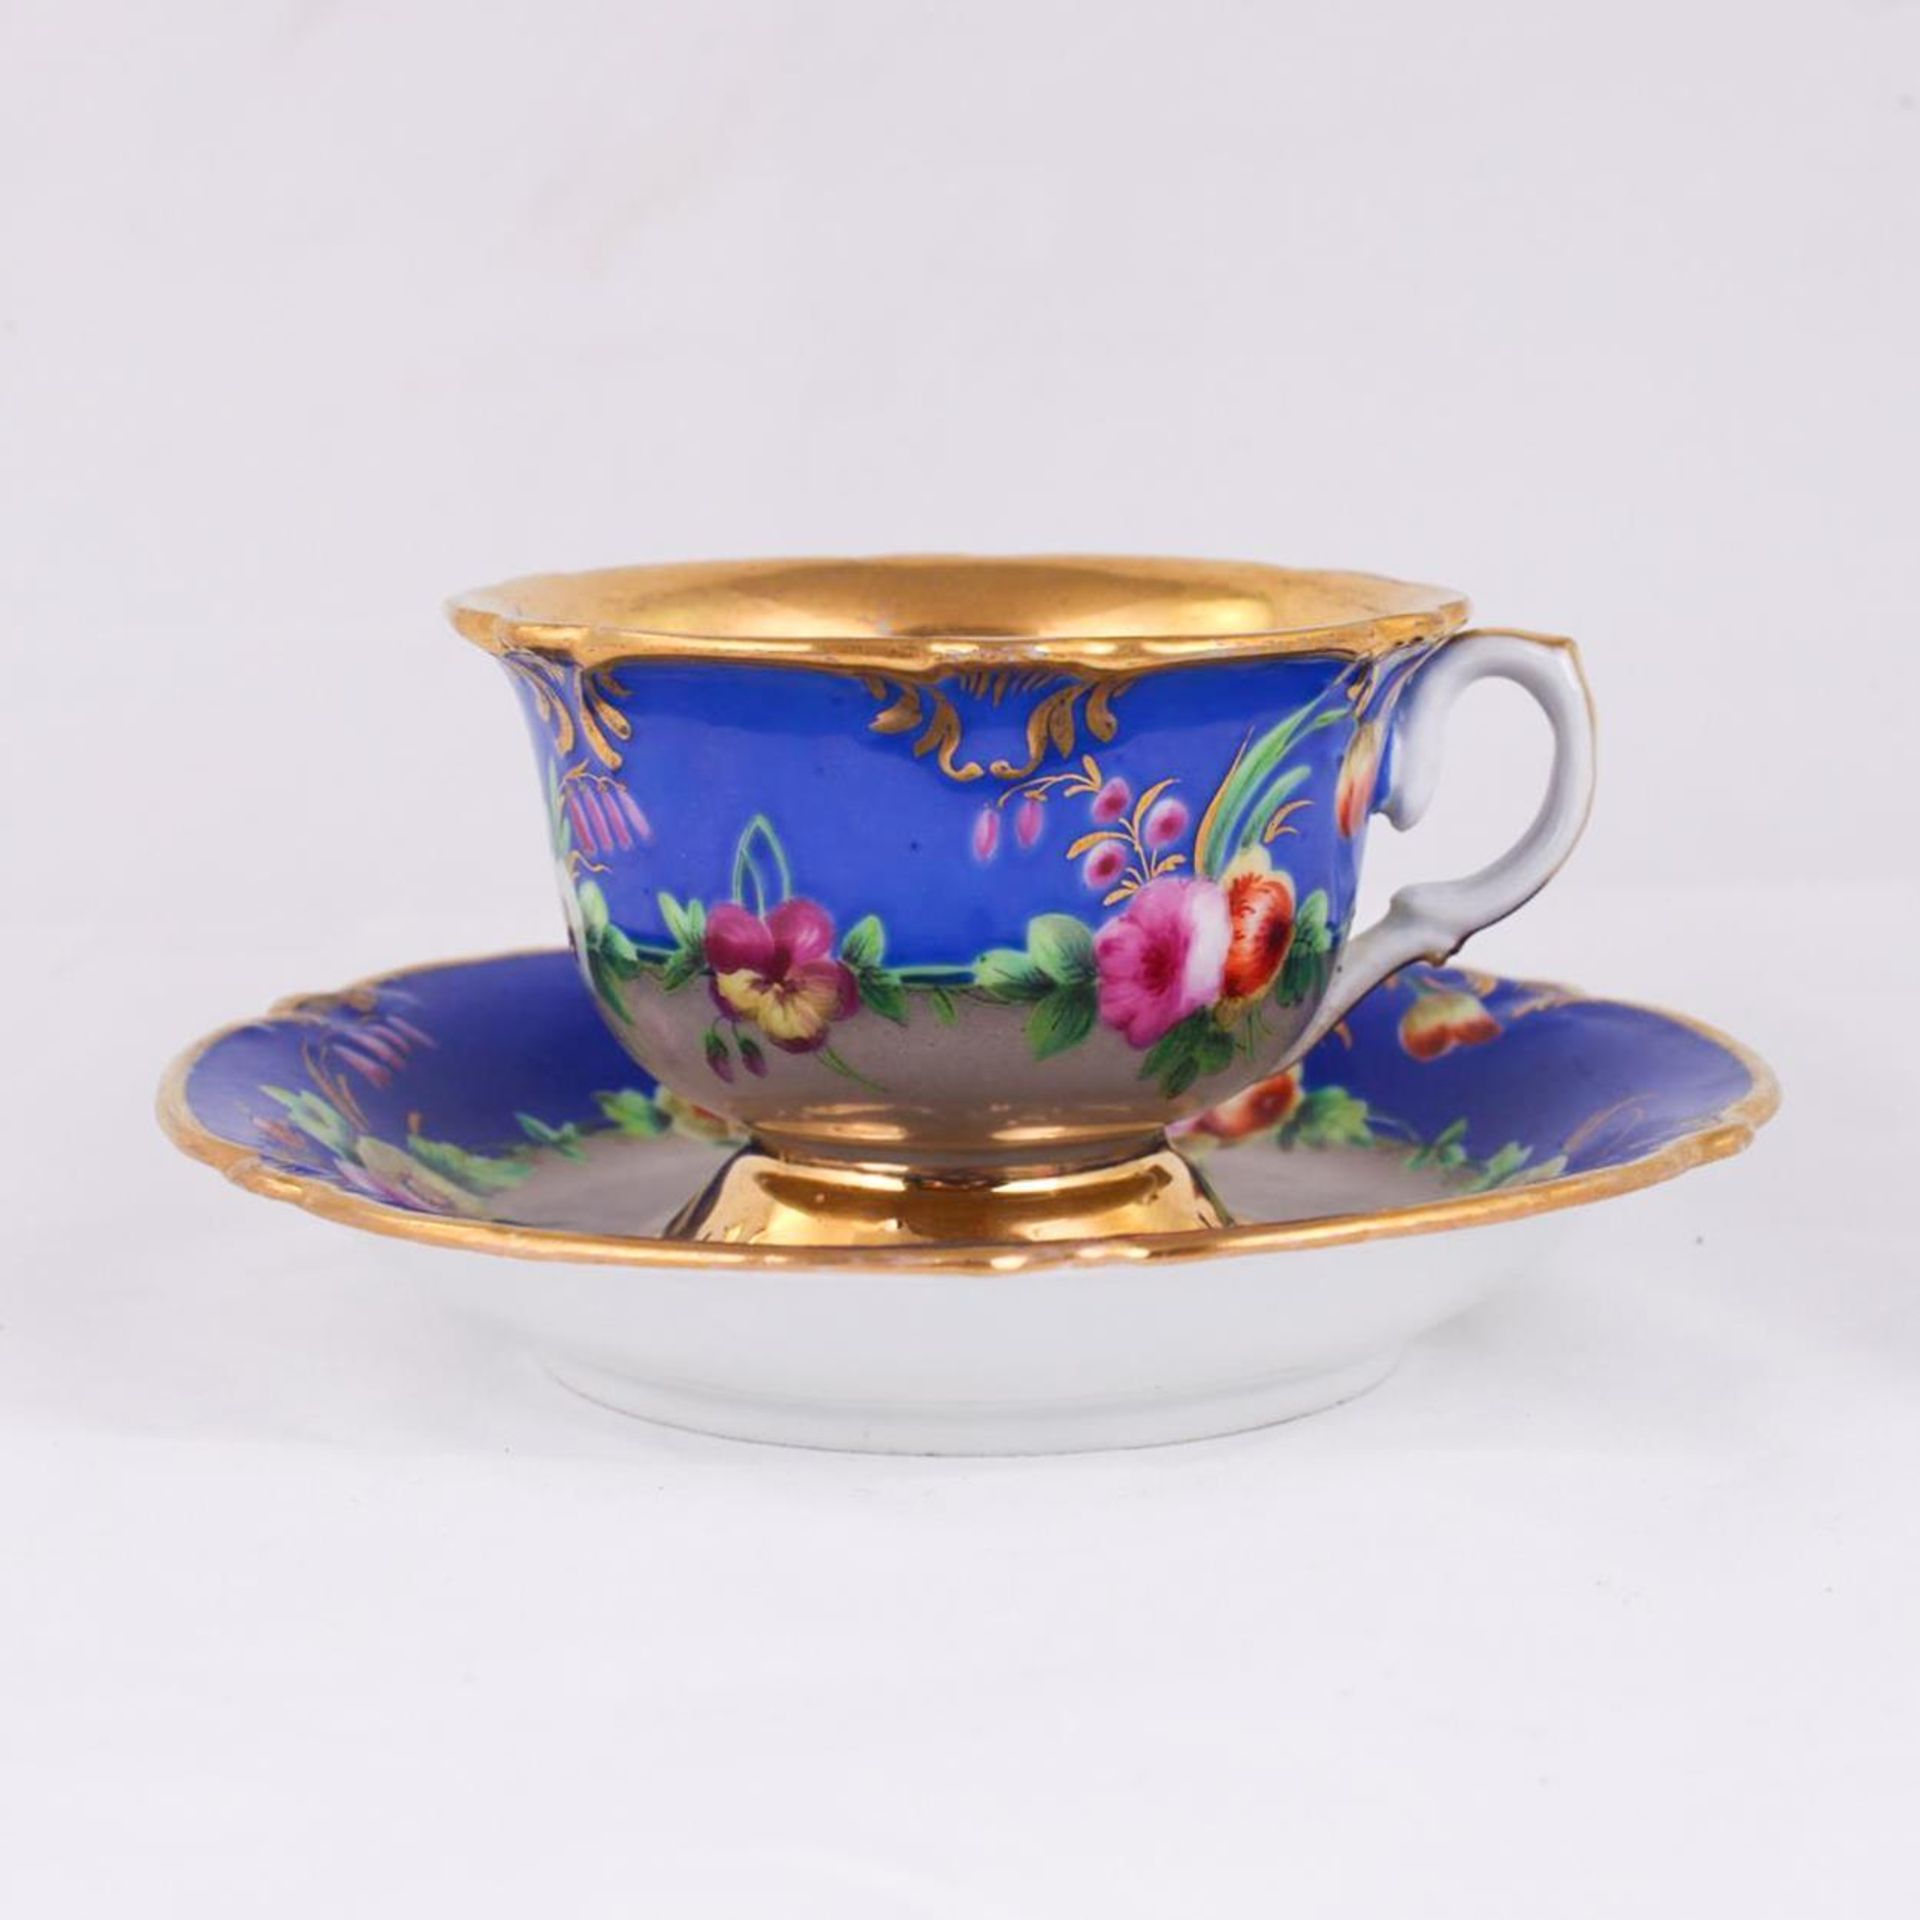 Tea set. 16 pieces: six tea cup and saucer sets, one teapot, one sugar bowl, one milk jug, one dish. - Image 24 of 27